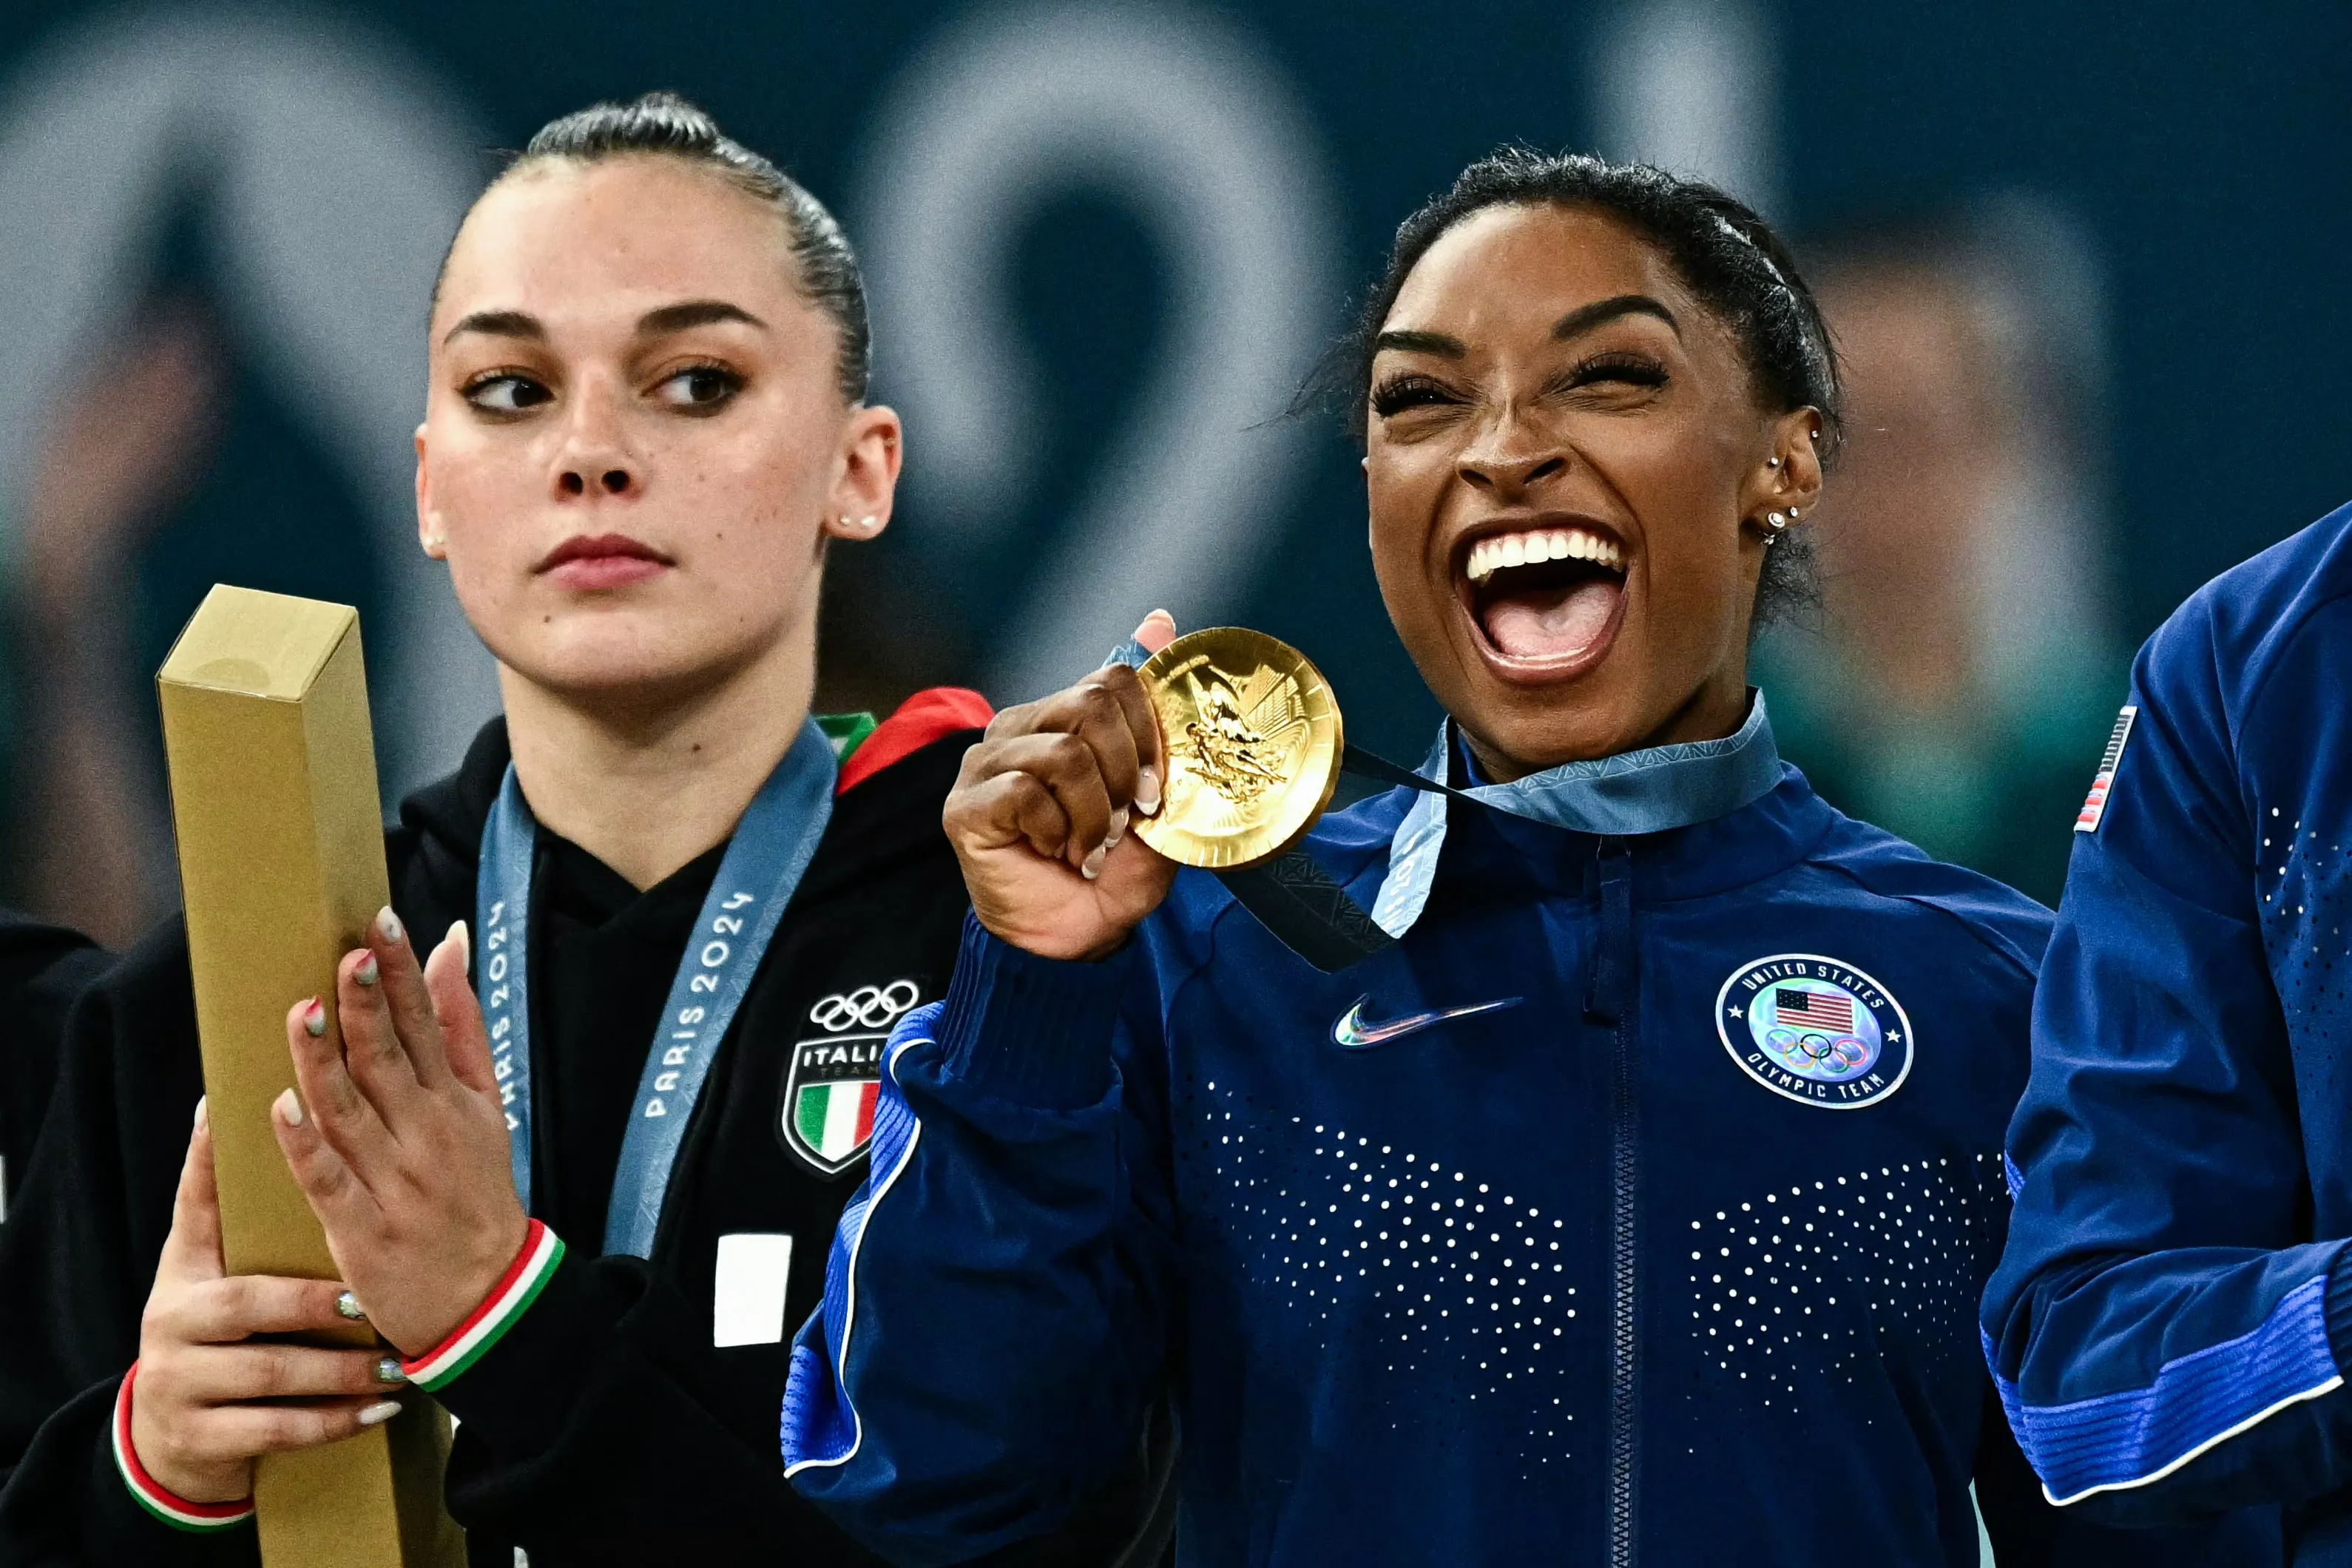 Gymnast Simone Biles poses with the gold medal during the podium ceremony